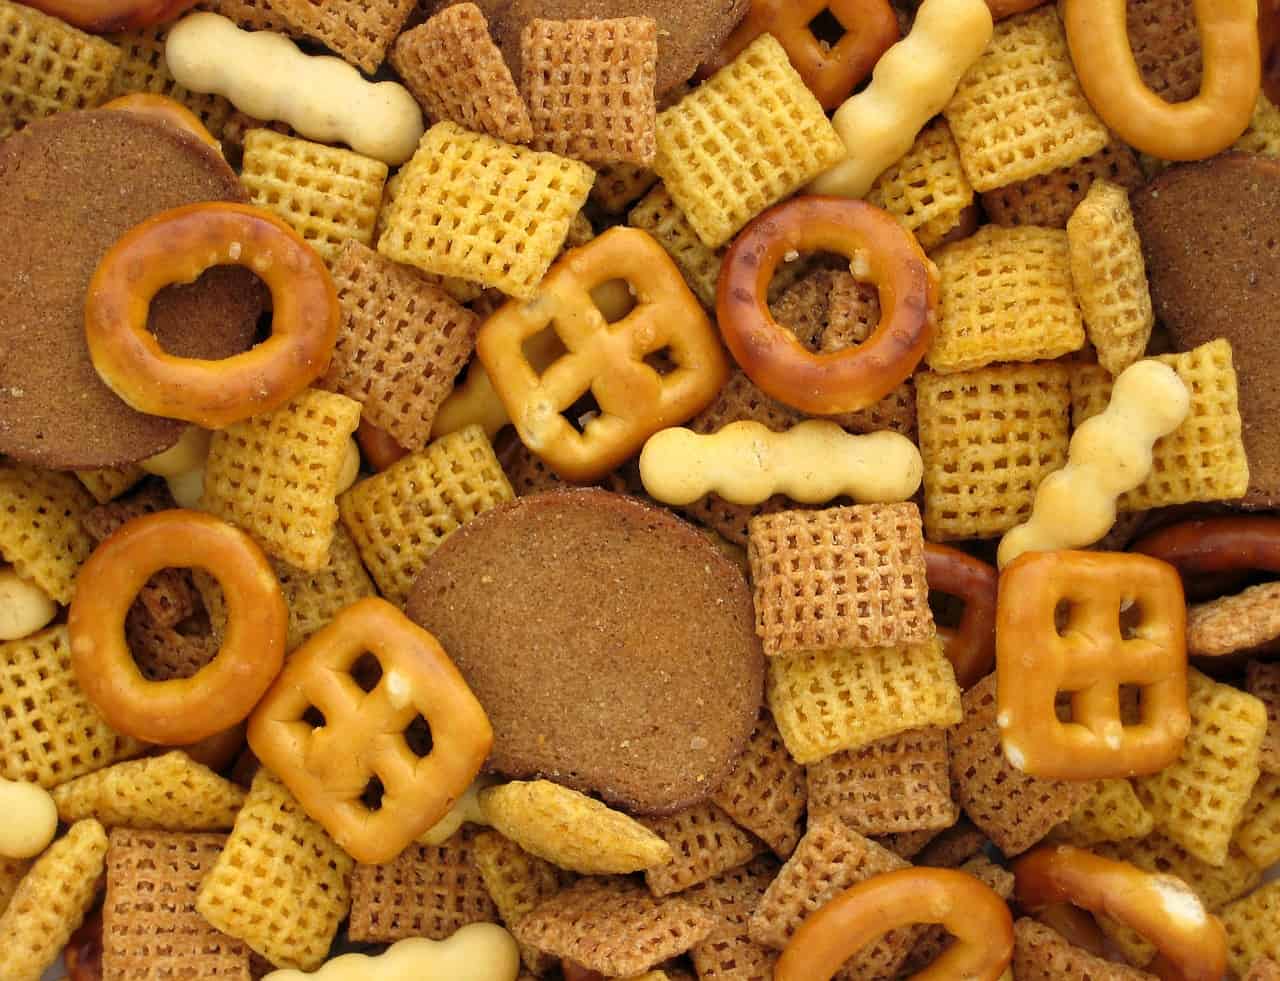 It's Party Time with General Mills Chex Mix